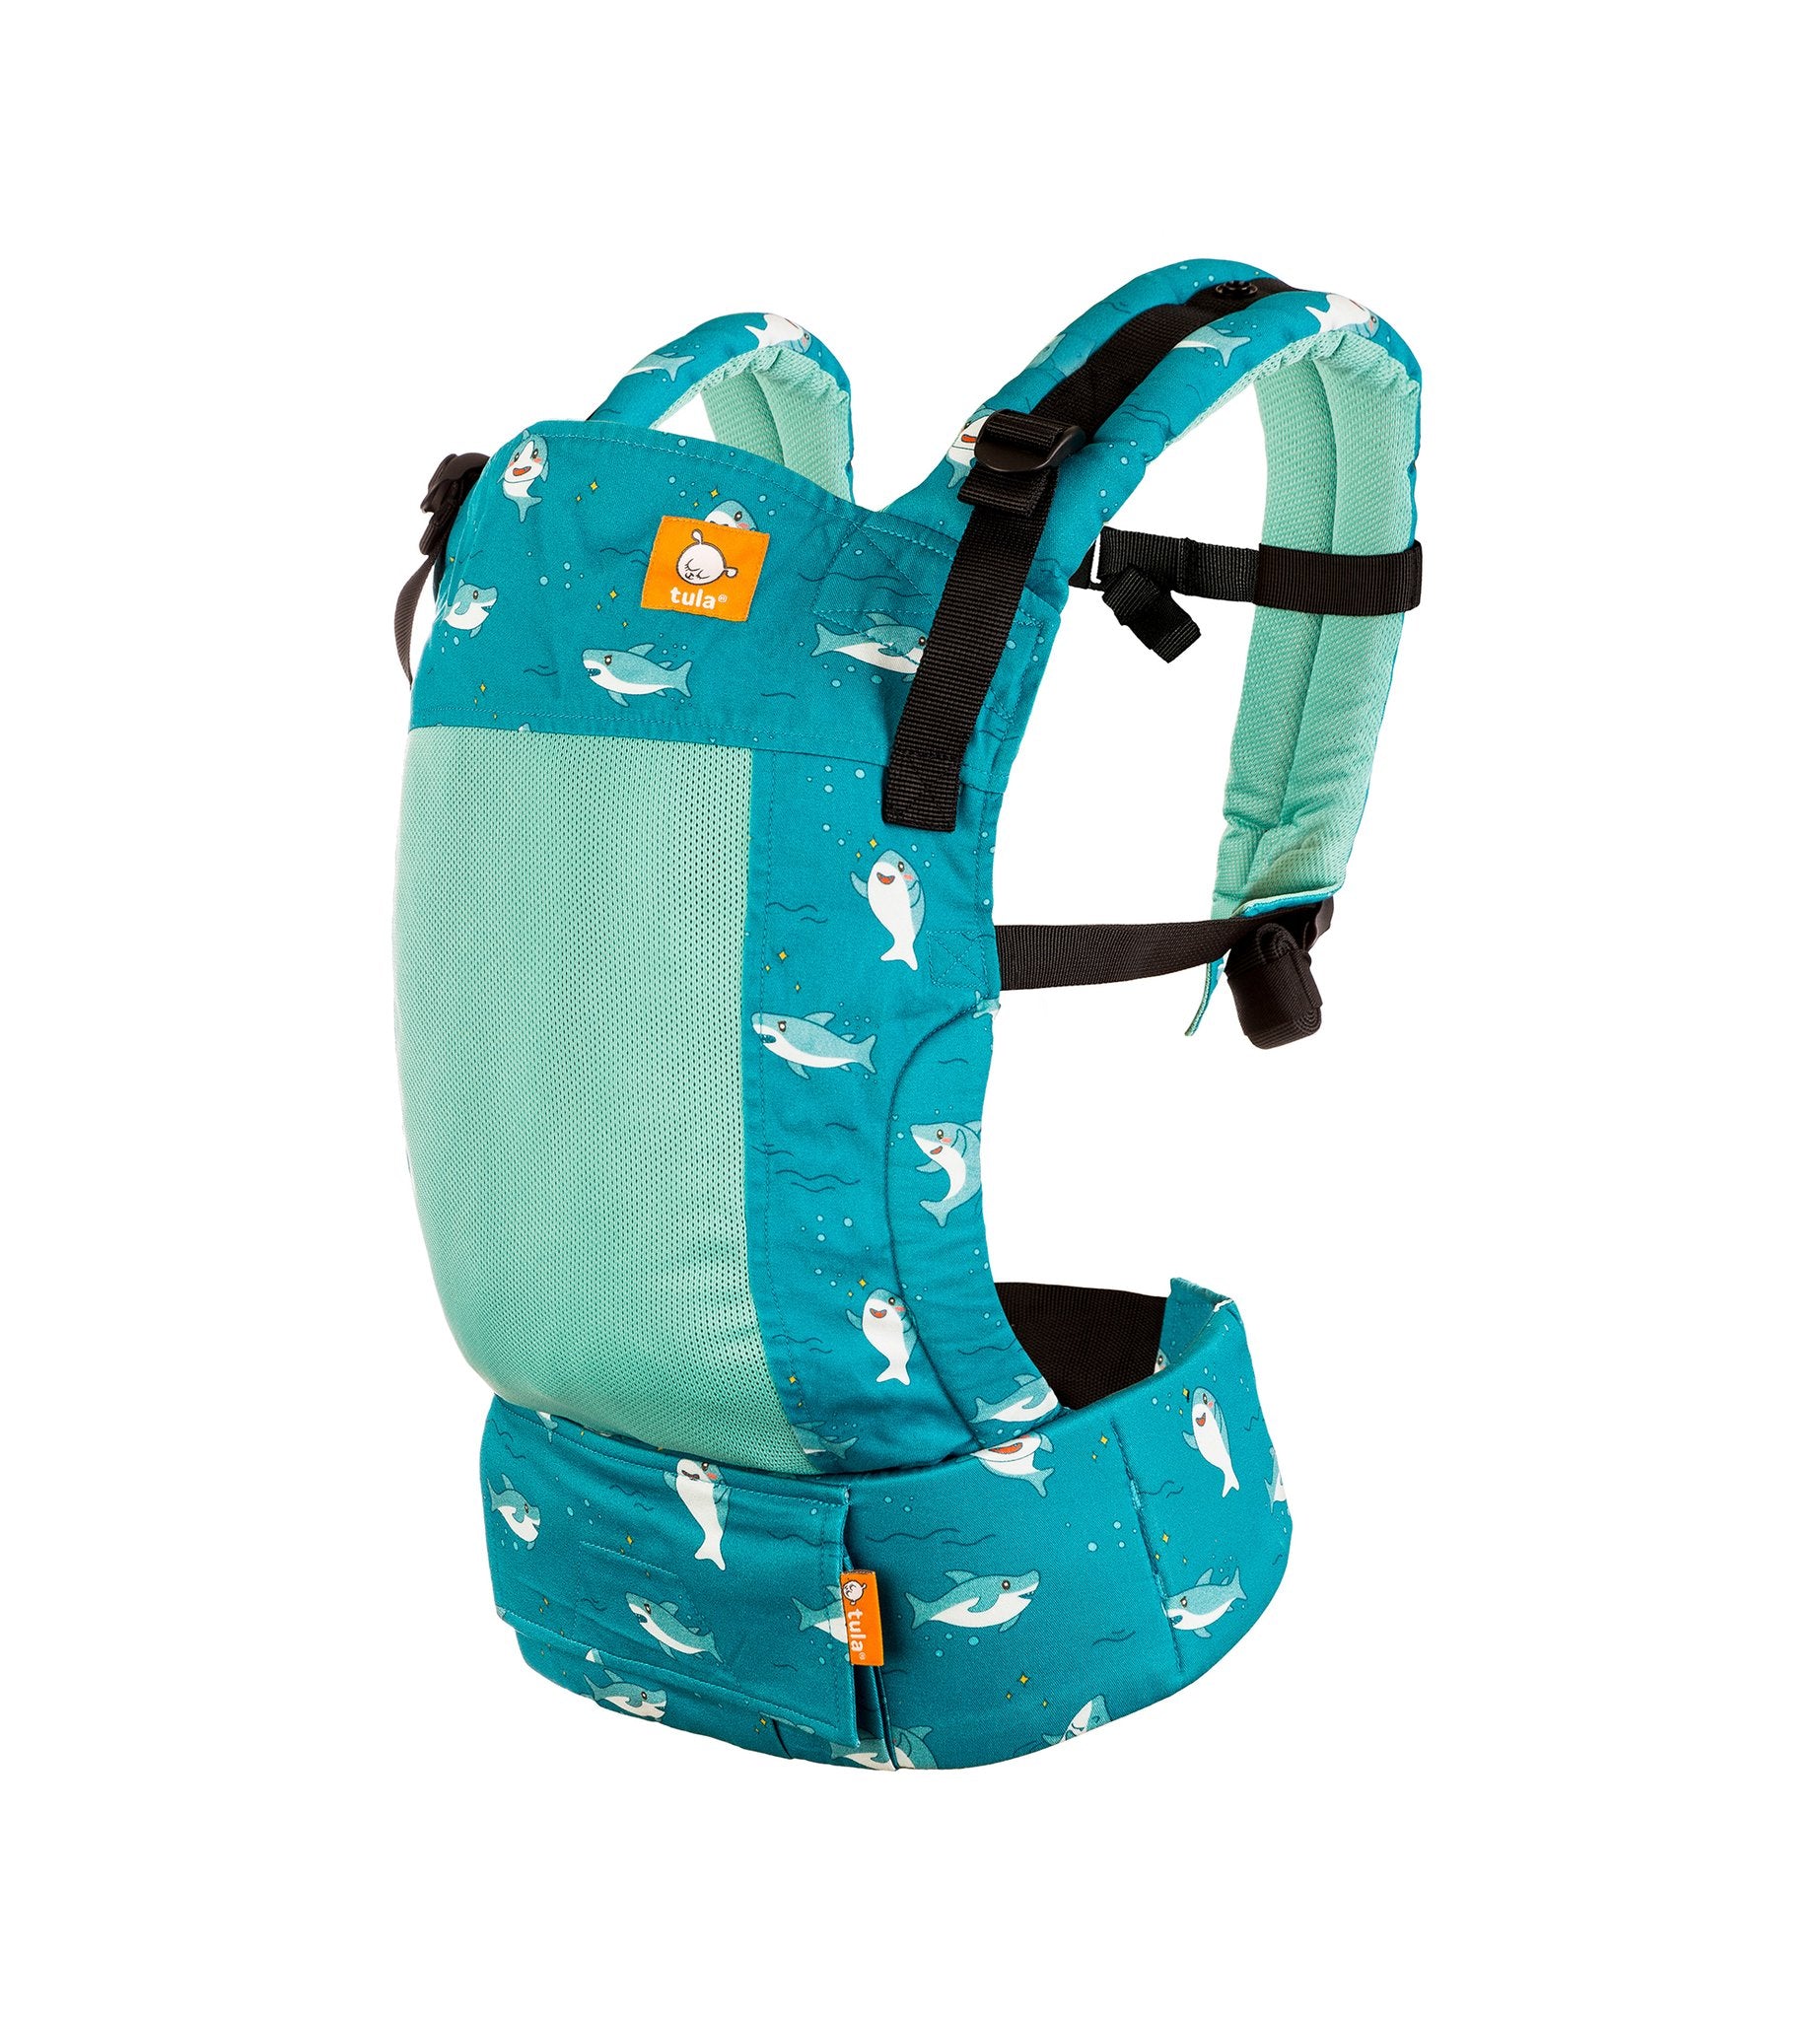 Tula Baby Carrier FTG (Free to Grow)- Baby Shark